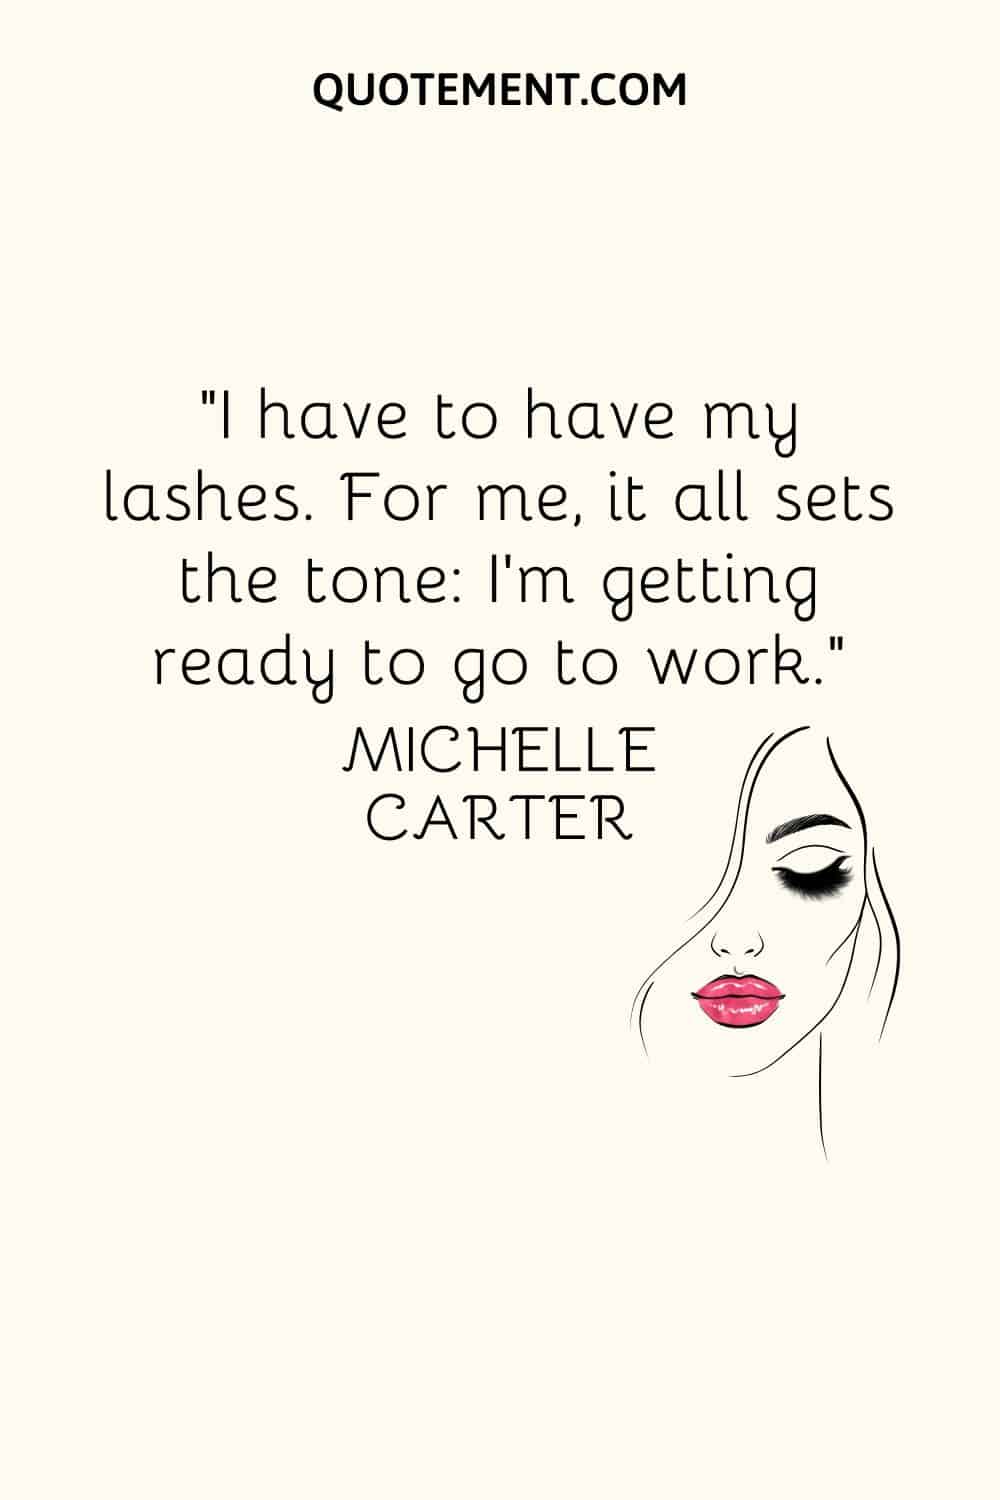 I have to have my lashes. For me, it all sets the tone I’m getting ready to go to work